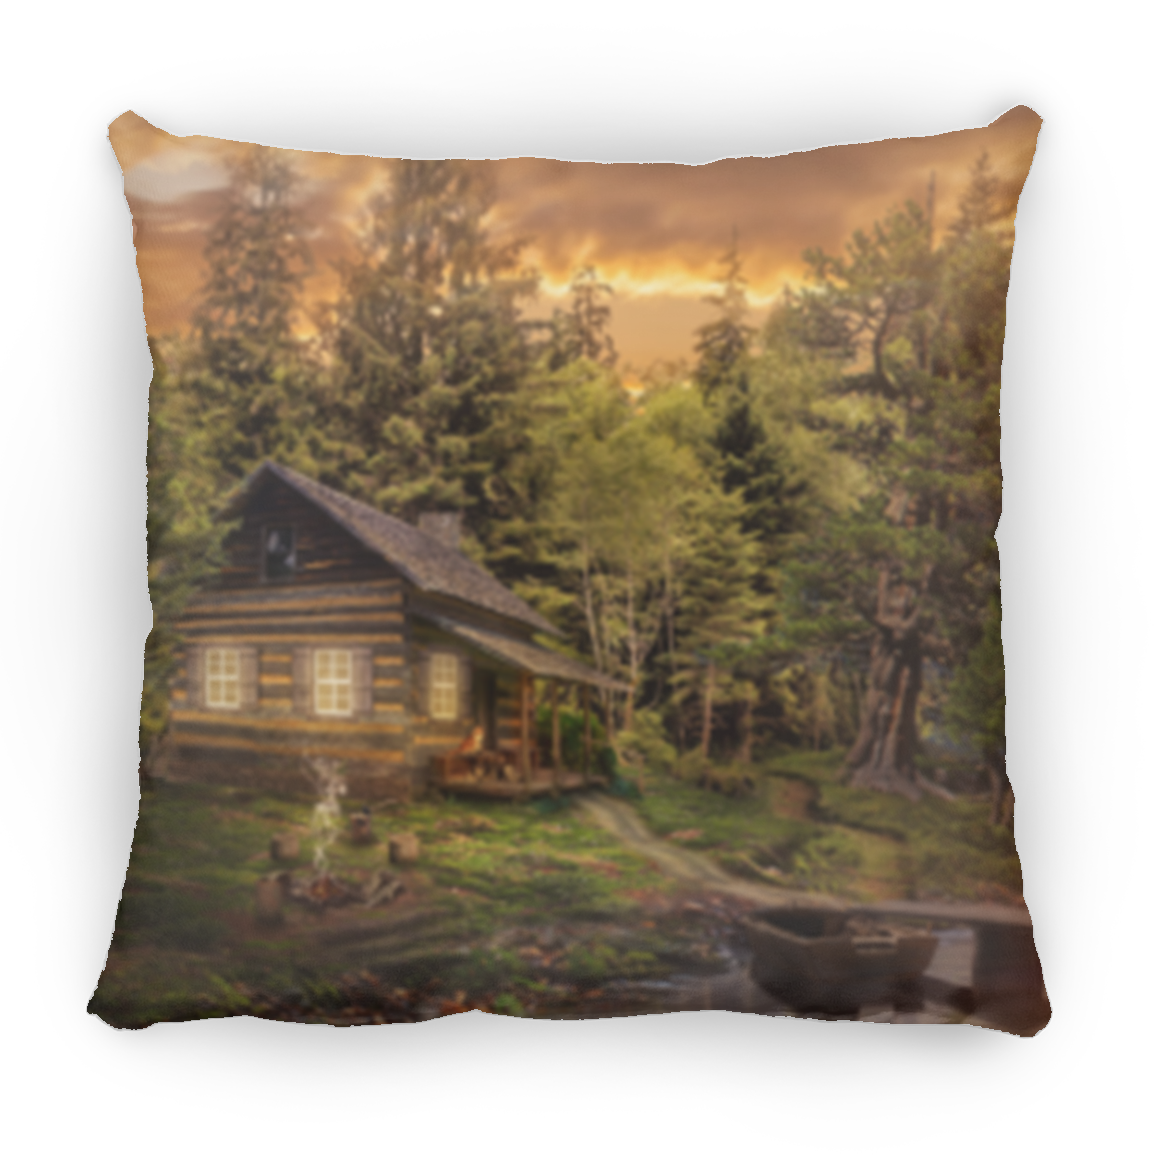 Country Cabin Square Pillow 14x14